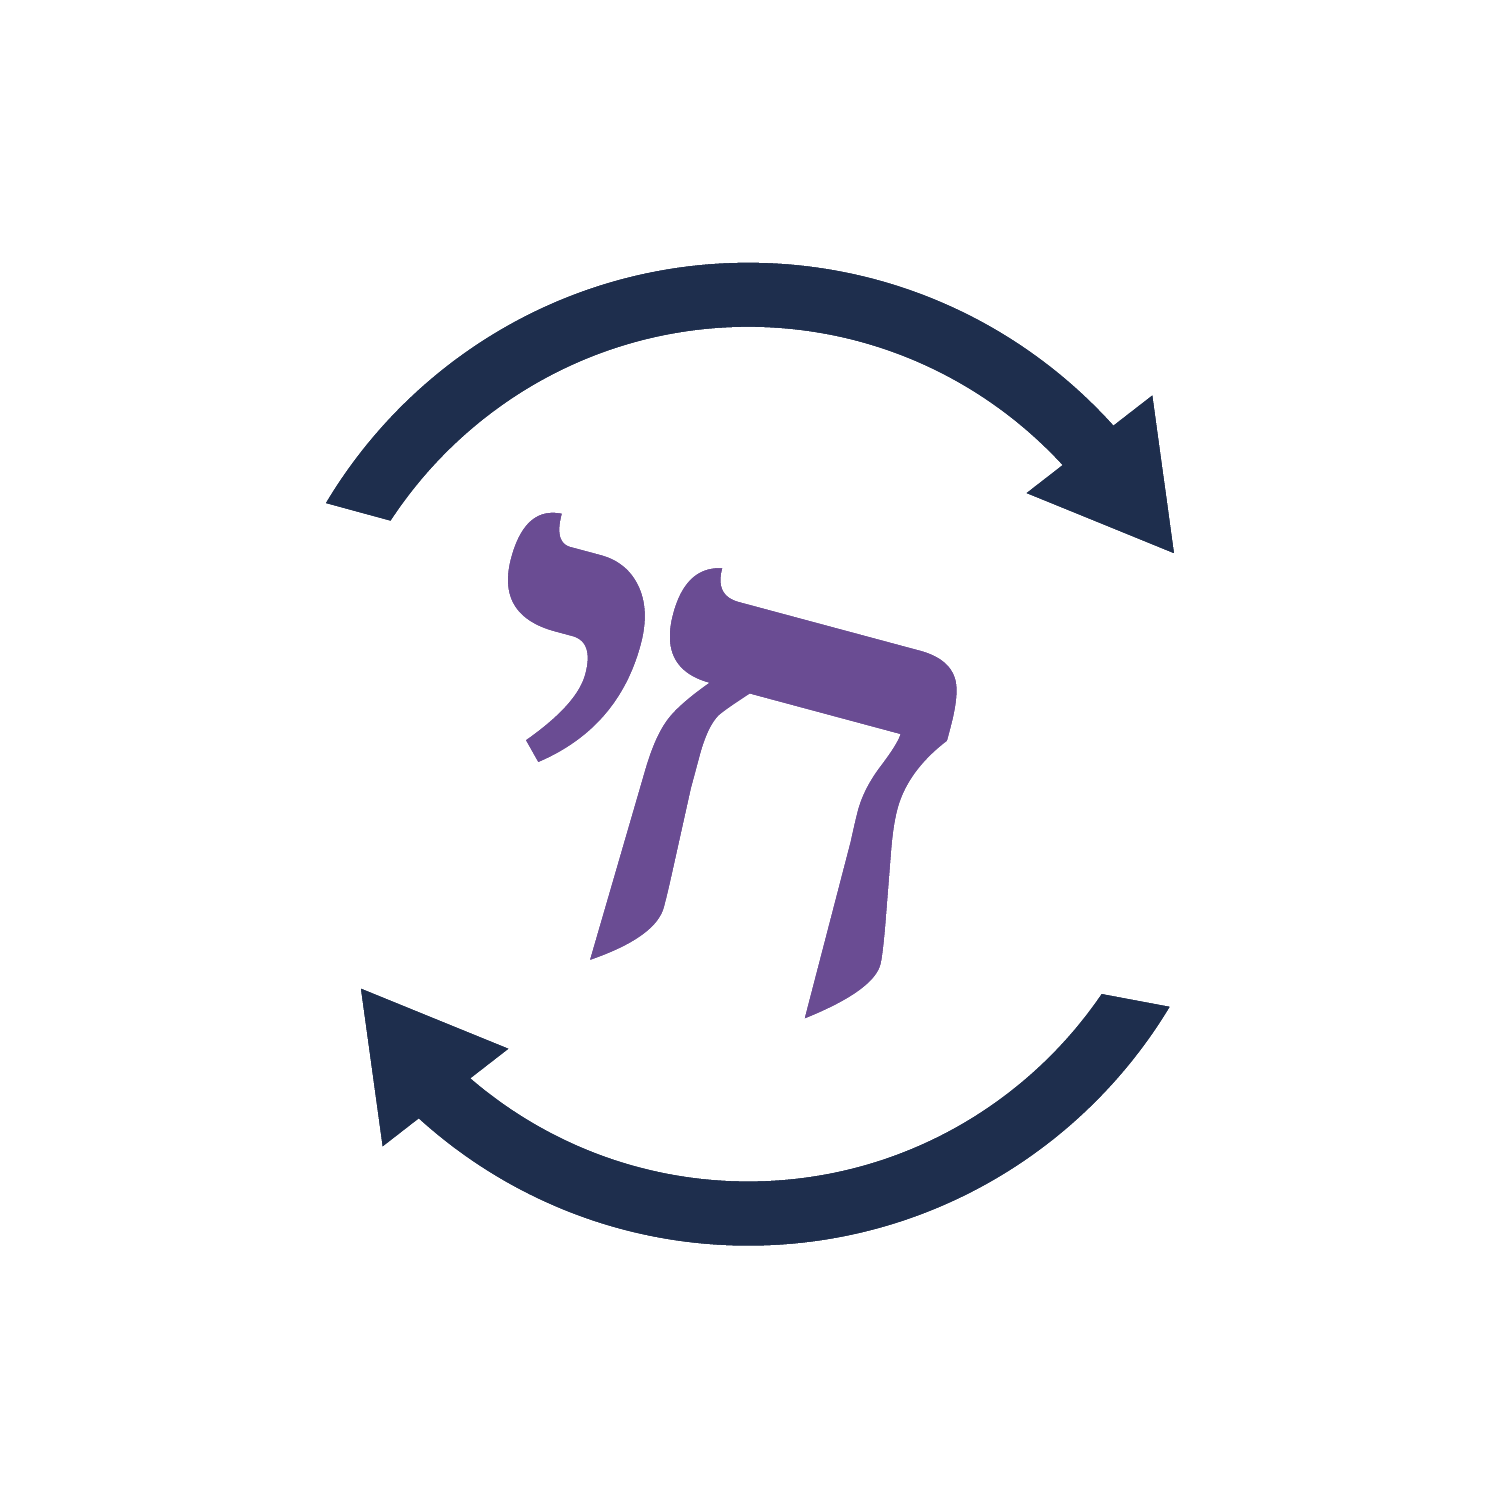 A hebrew word in a circle with arrows.